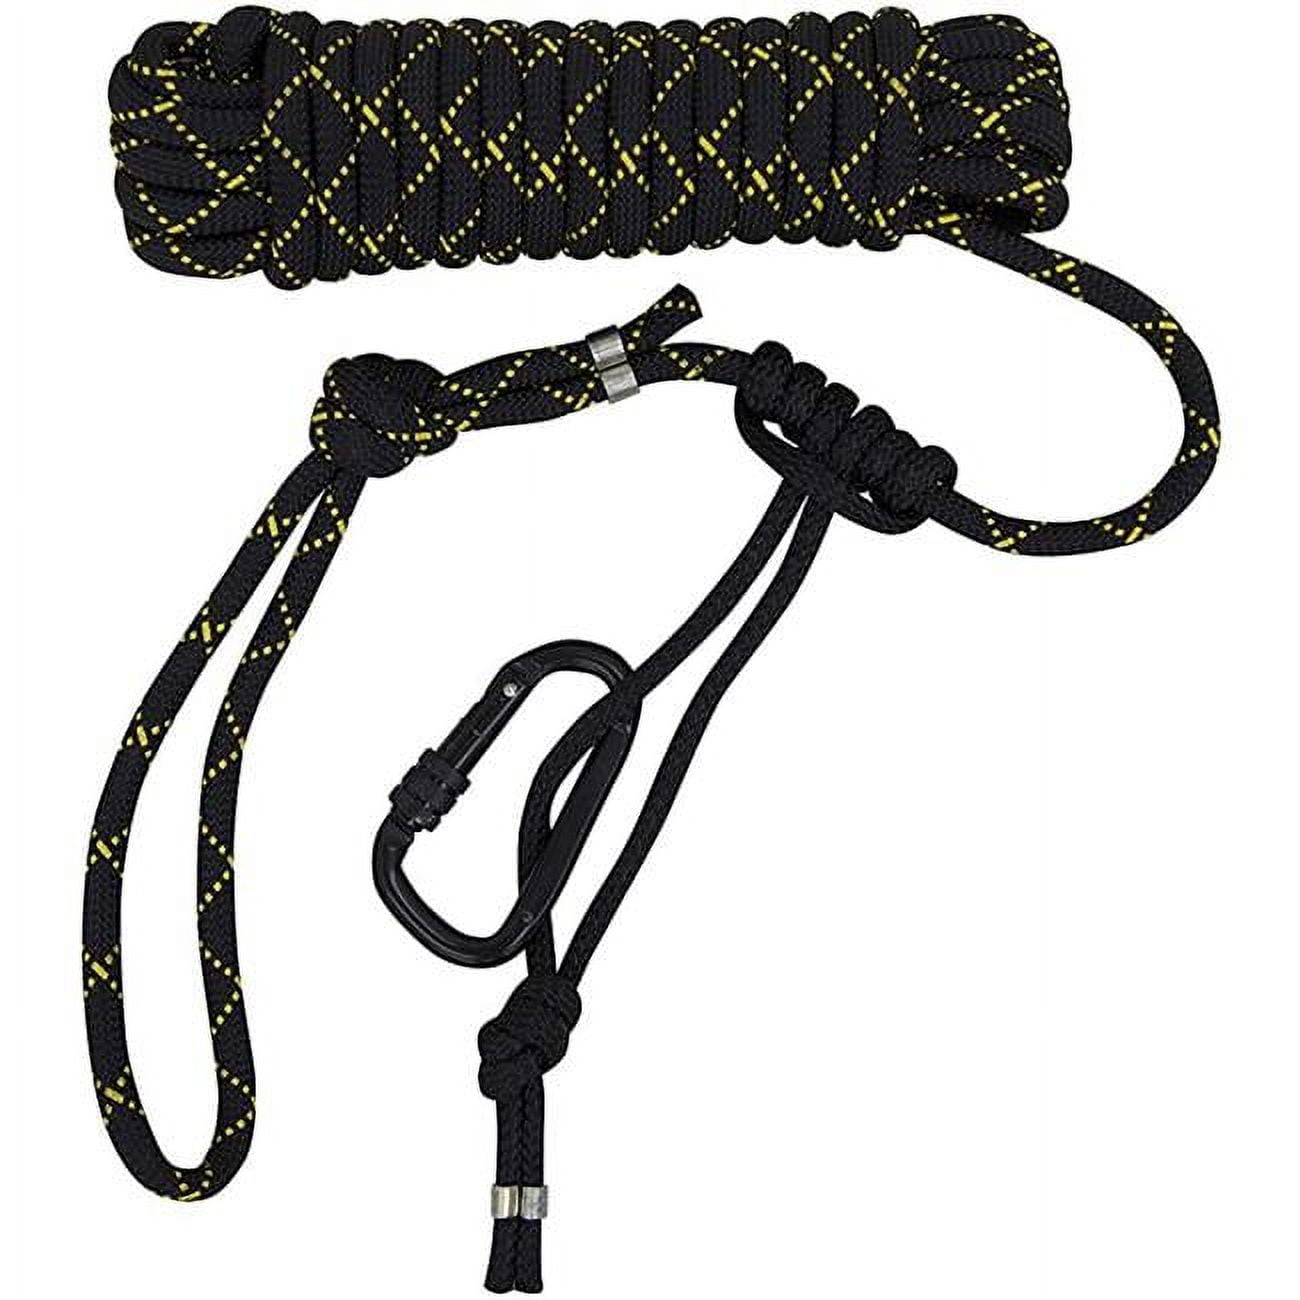 Rivers Edge® 30' Safety Rope, RE787